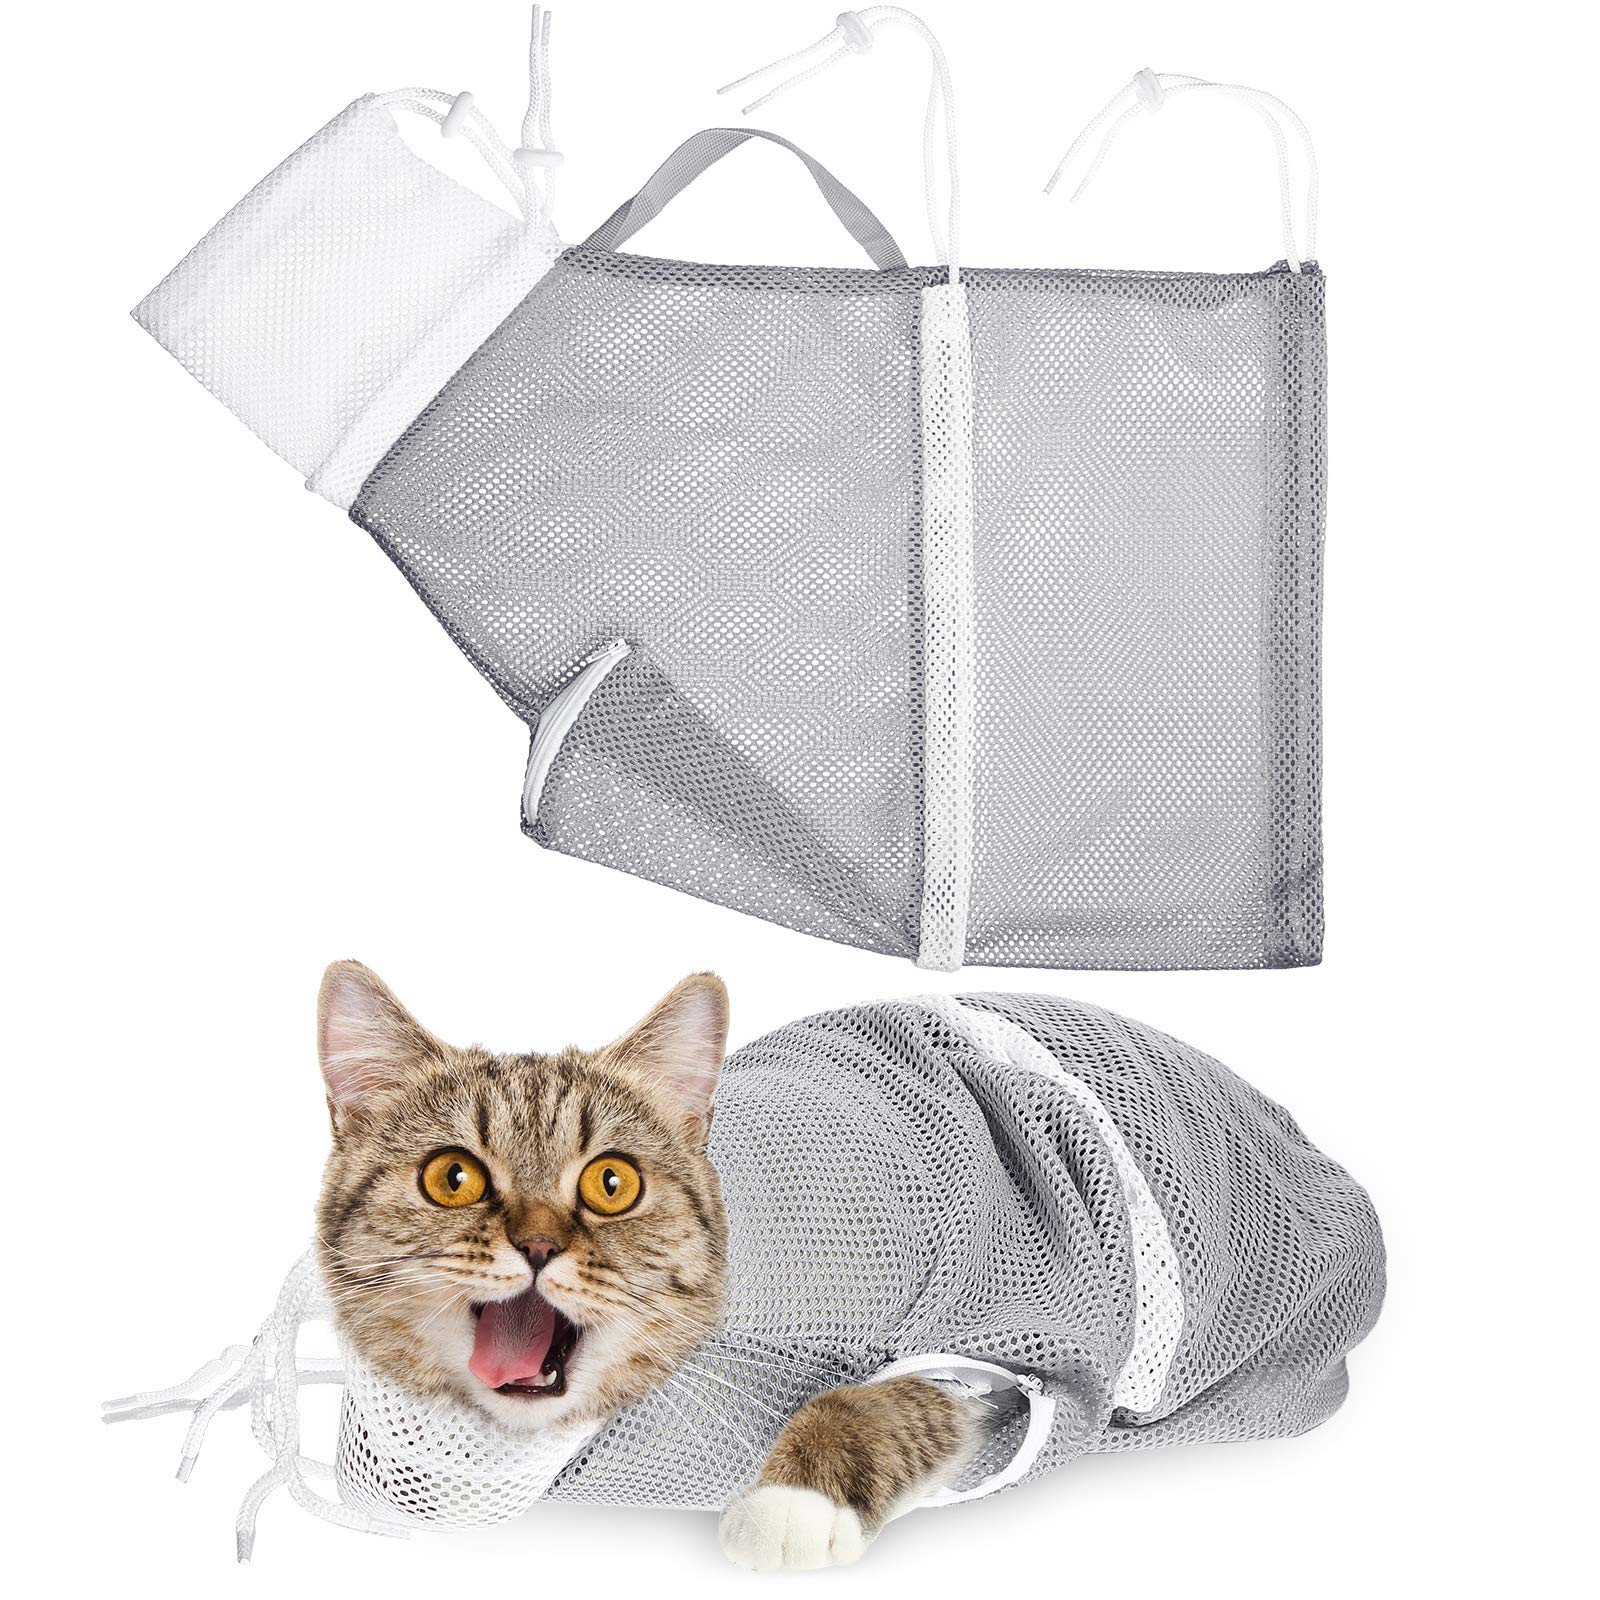 Cat Shower Net Bag Cat Grooming Bathing Bag Adjustable Cat Washing Bag  Multifunctional Cat Restraint Bag Prevent Biting Scratching for Bathing,  Nail Trimming, Ears Clean, Keeping Calm Grey